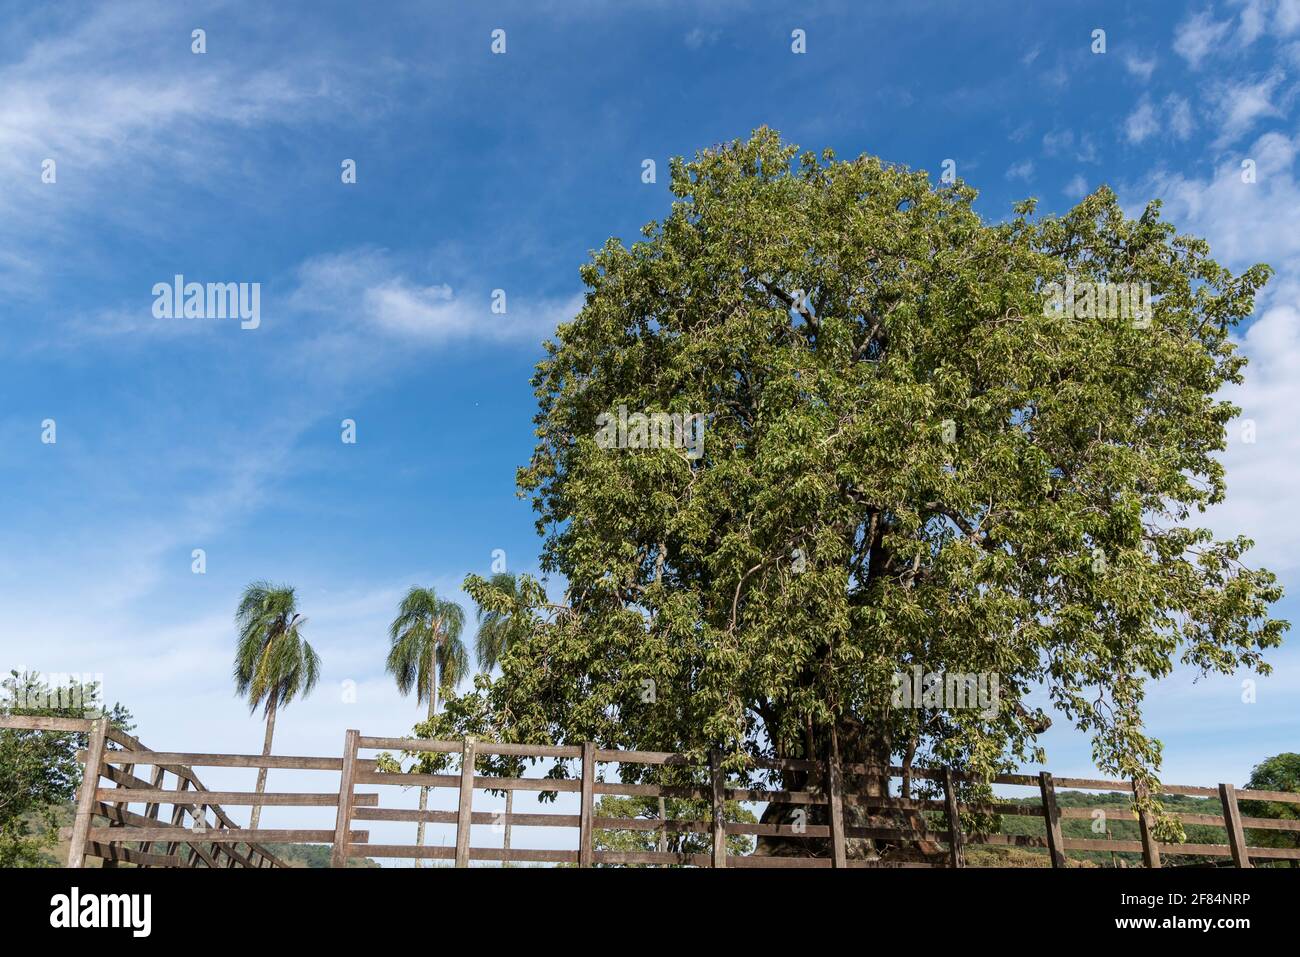 Centenary tree of Úmbu (Phytolacca dioica) and in the background the blue sky. Native plant of the Pampa biome in southern Latin America. Stock Photo